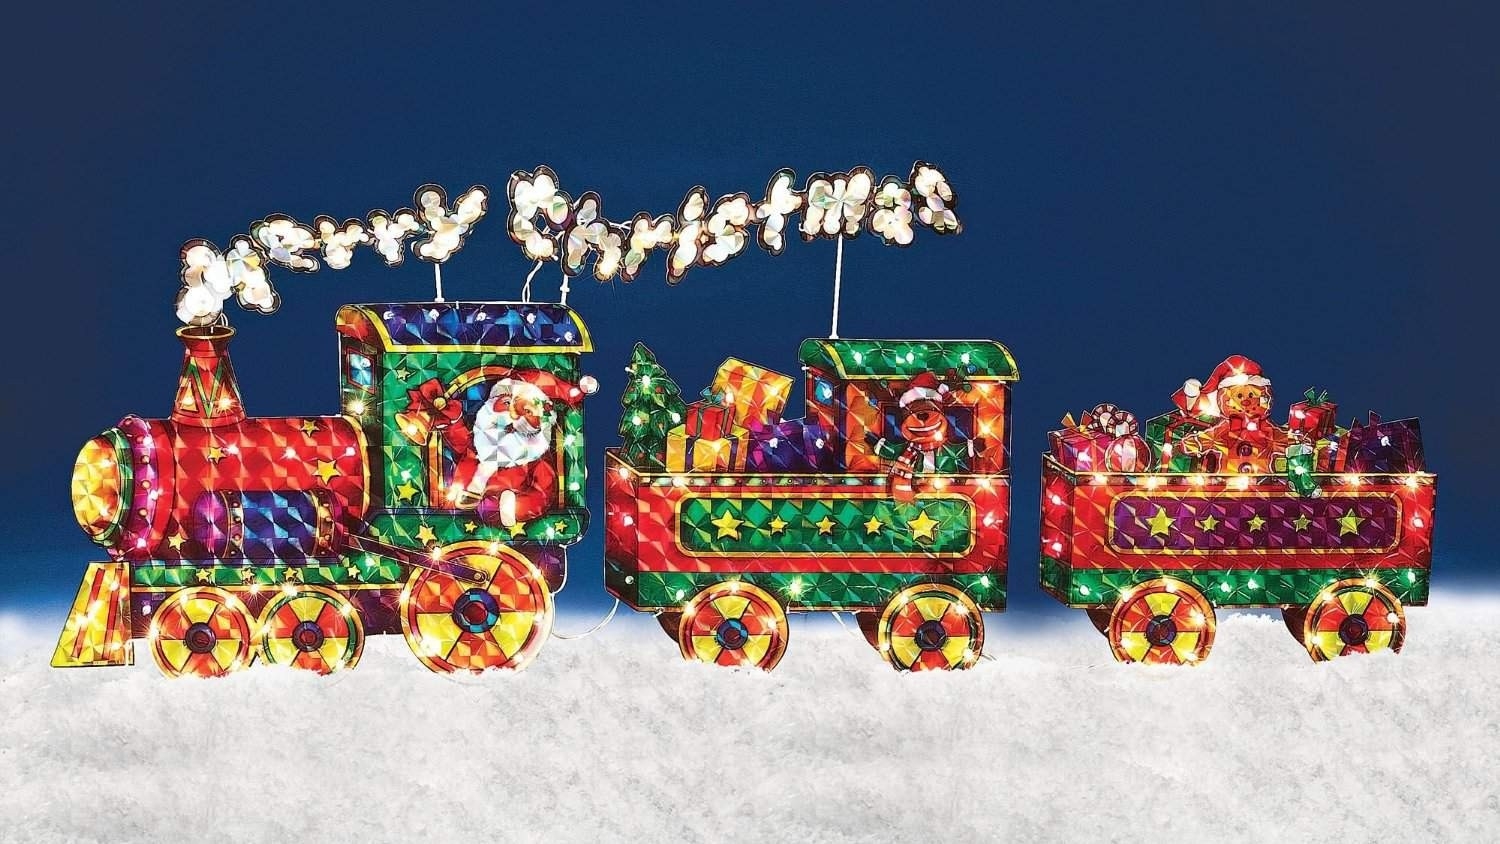 Outdoor Christmas Train Decoration  Ideas on Foter